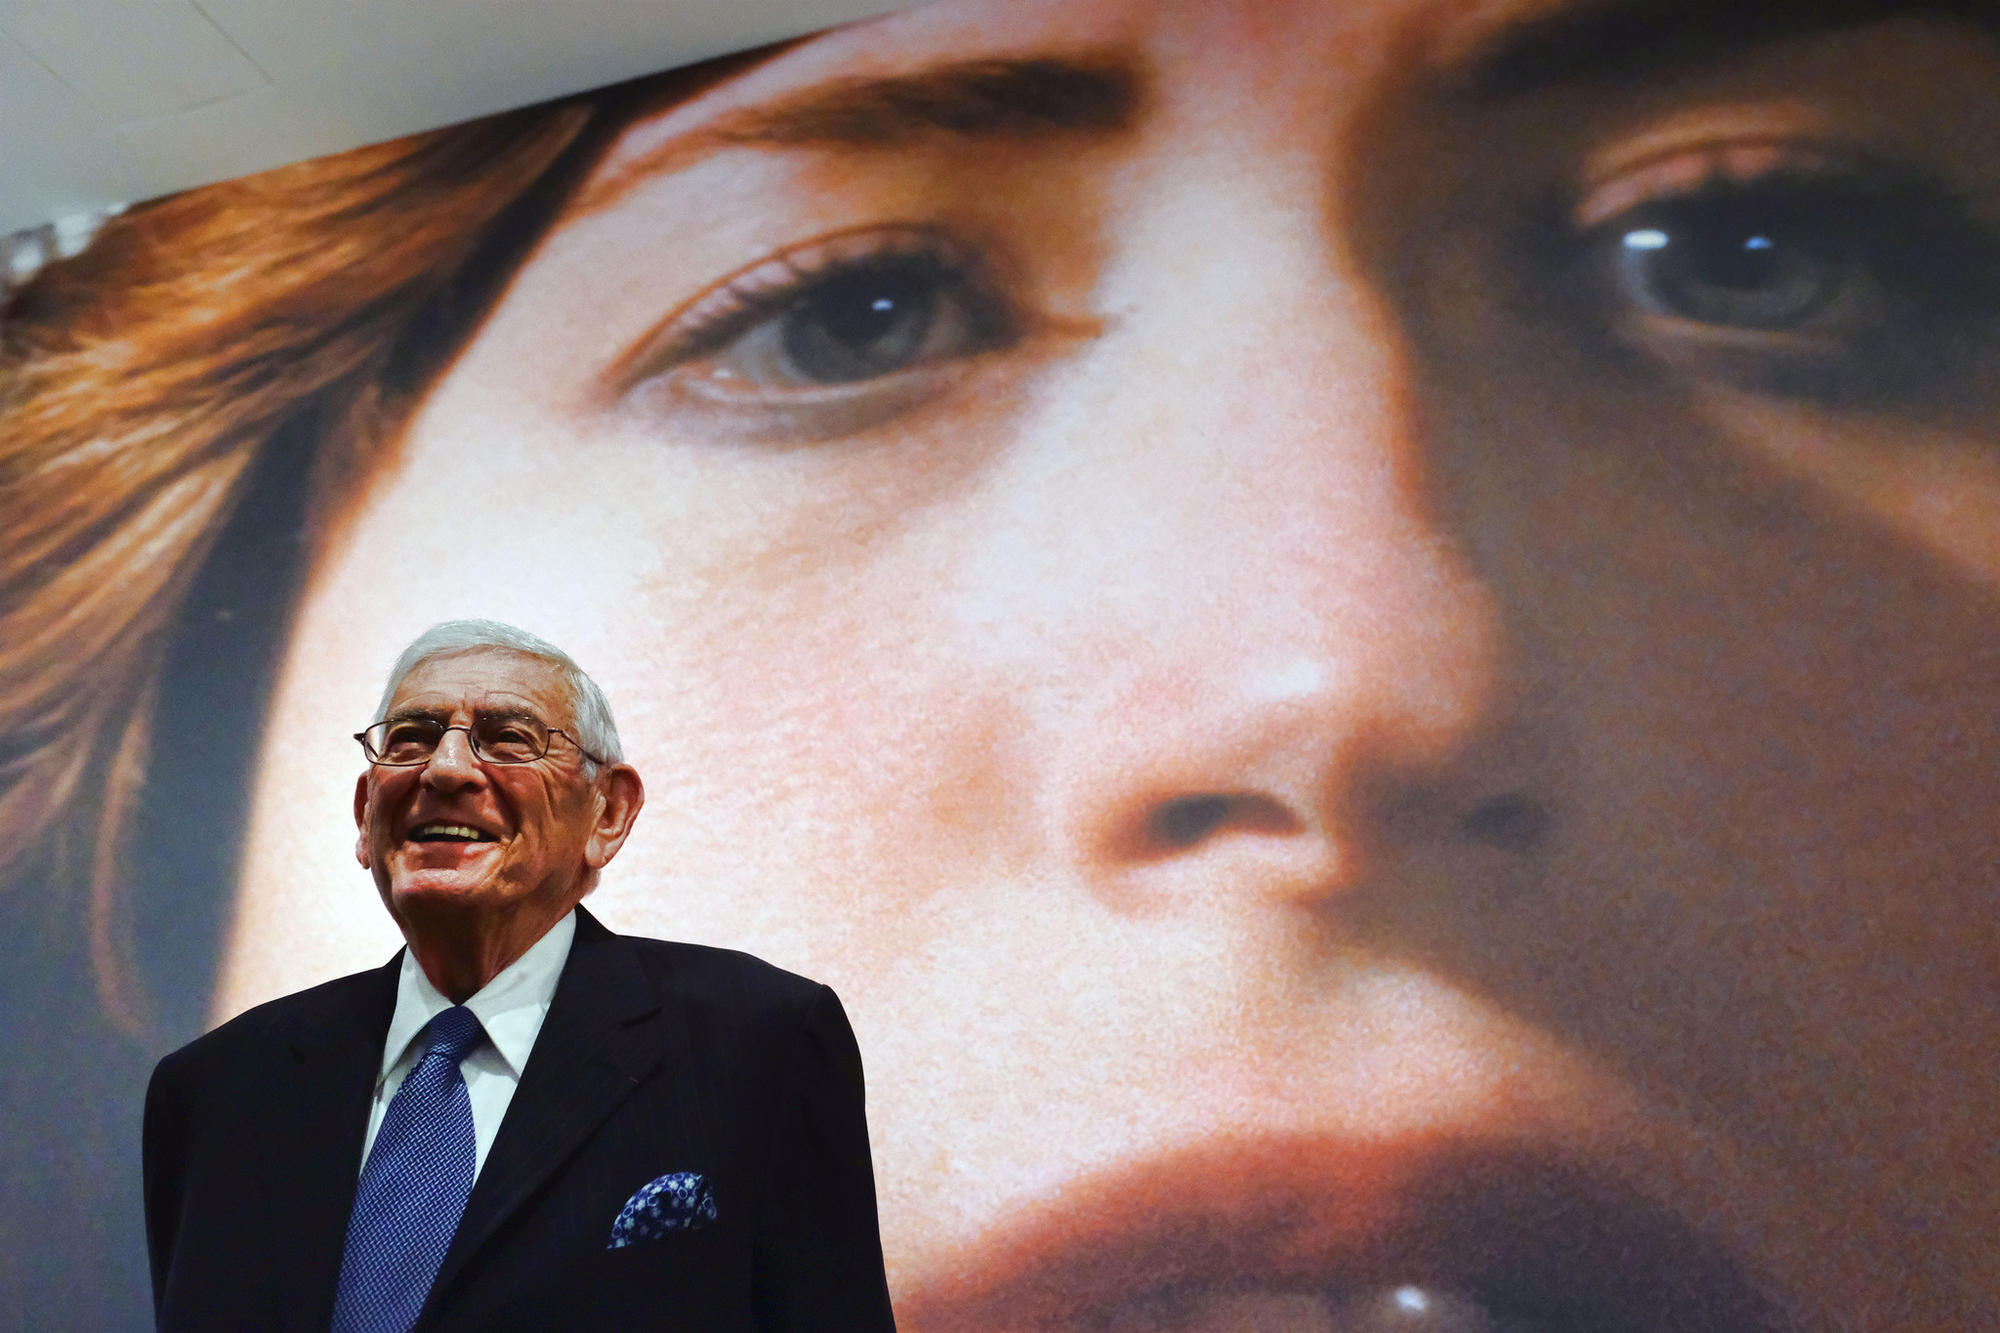 Eli Broad speaks during a press preview of the Cindy Sherman exhibition at the Broad Museum on Wednesday.